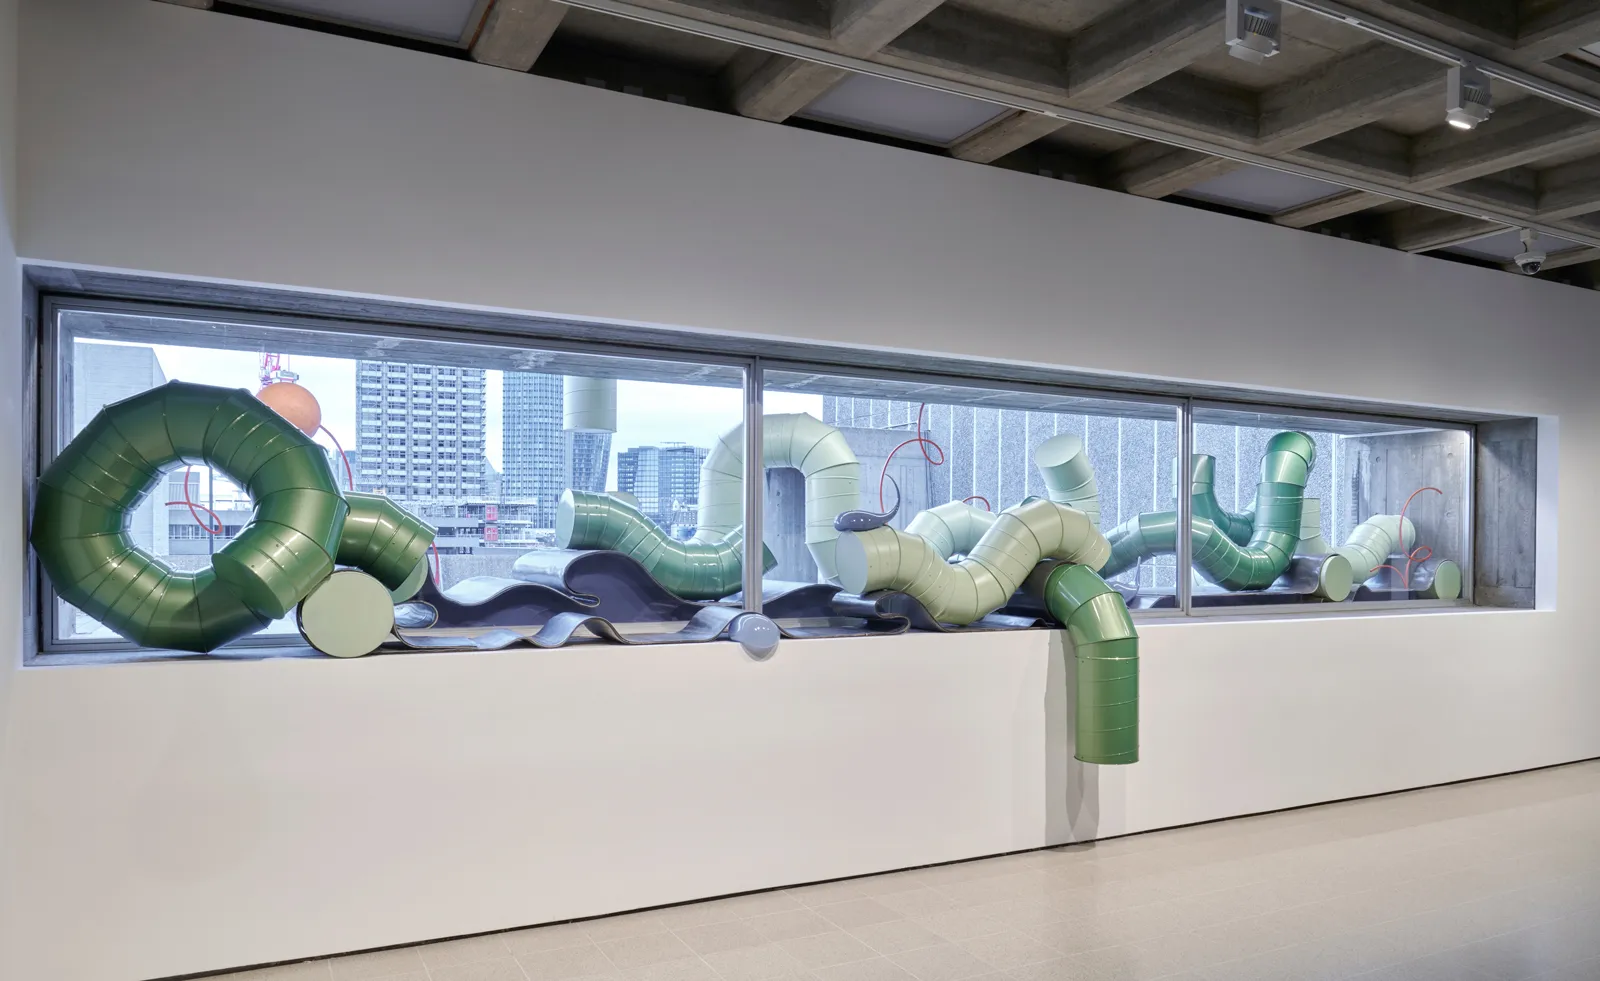 installation snakes along window ledge at Hayward Gallery, 'When Forms Come Alive’ exhibition